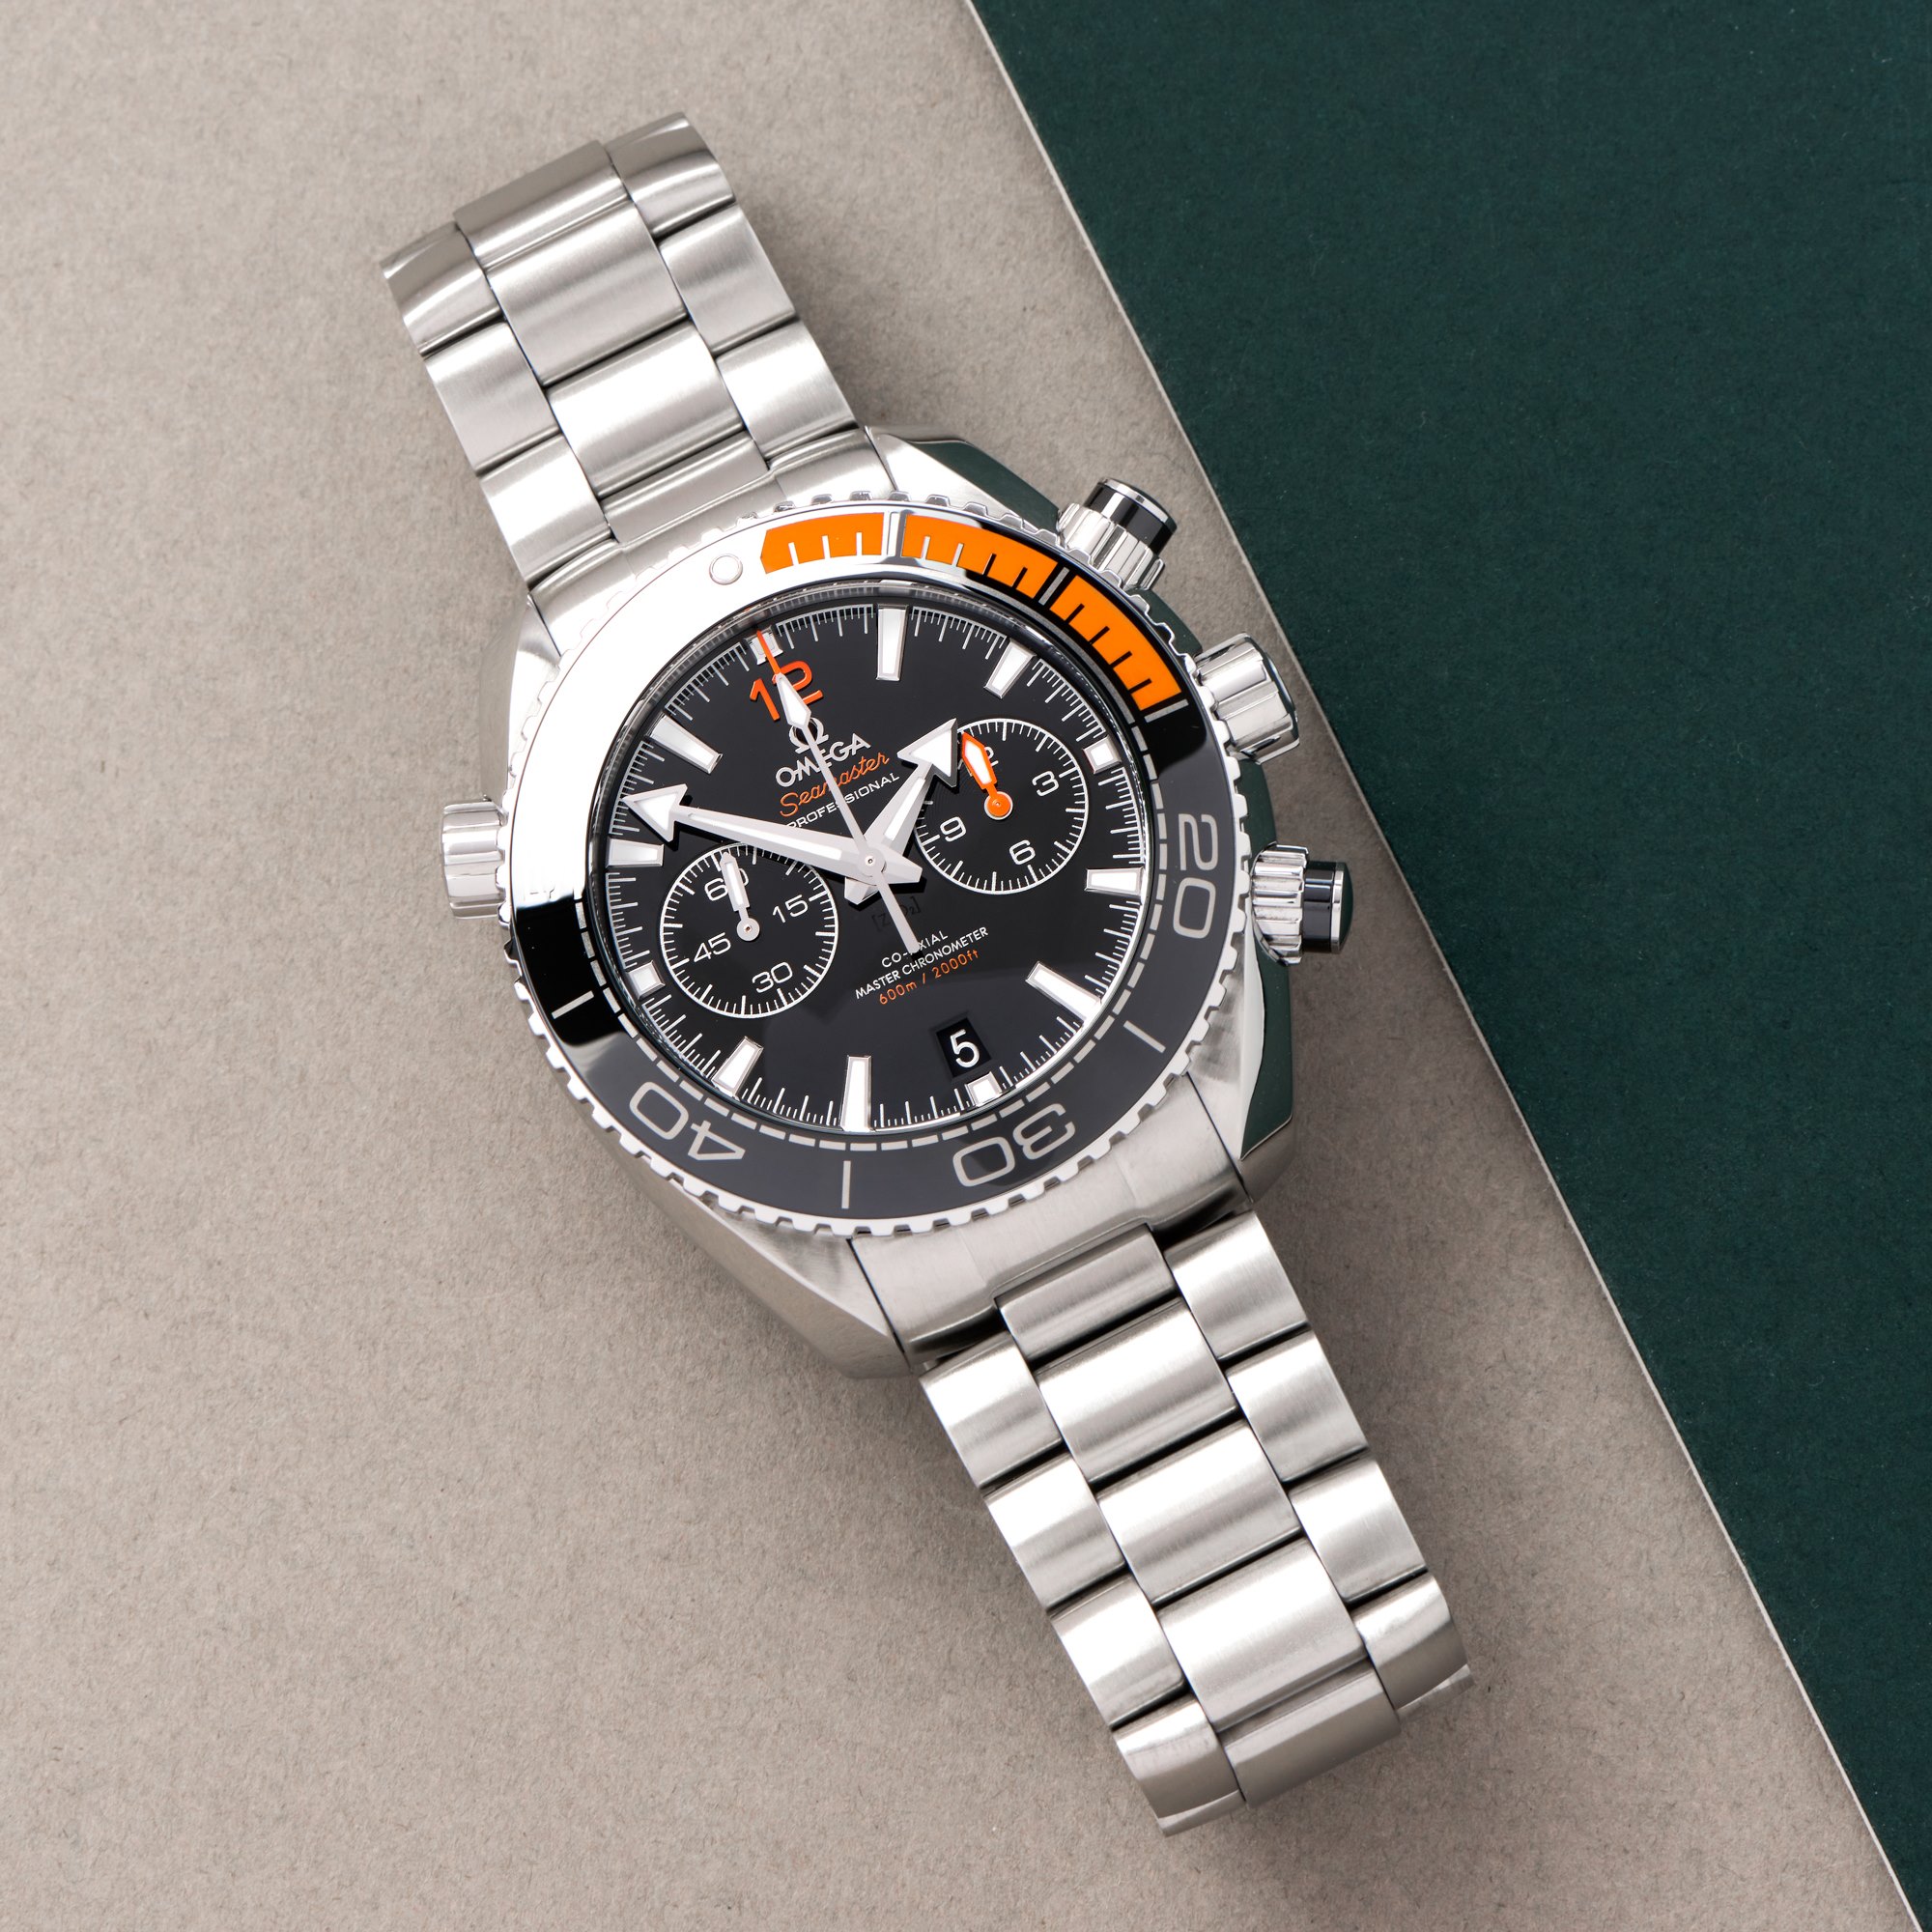 Omega Seamaster Planet Ocean Roestvrij Staal 215.30.46.51.01.002